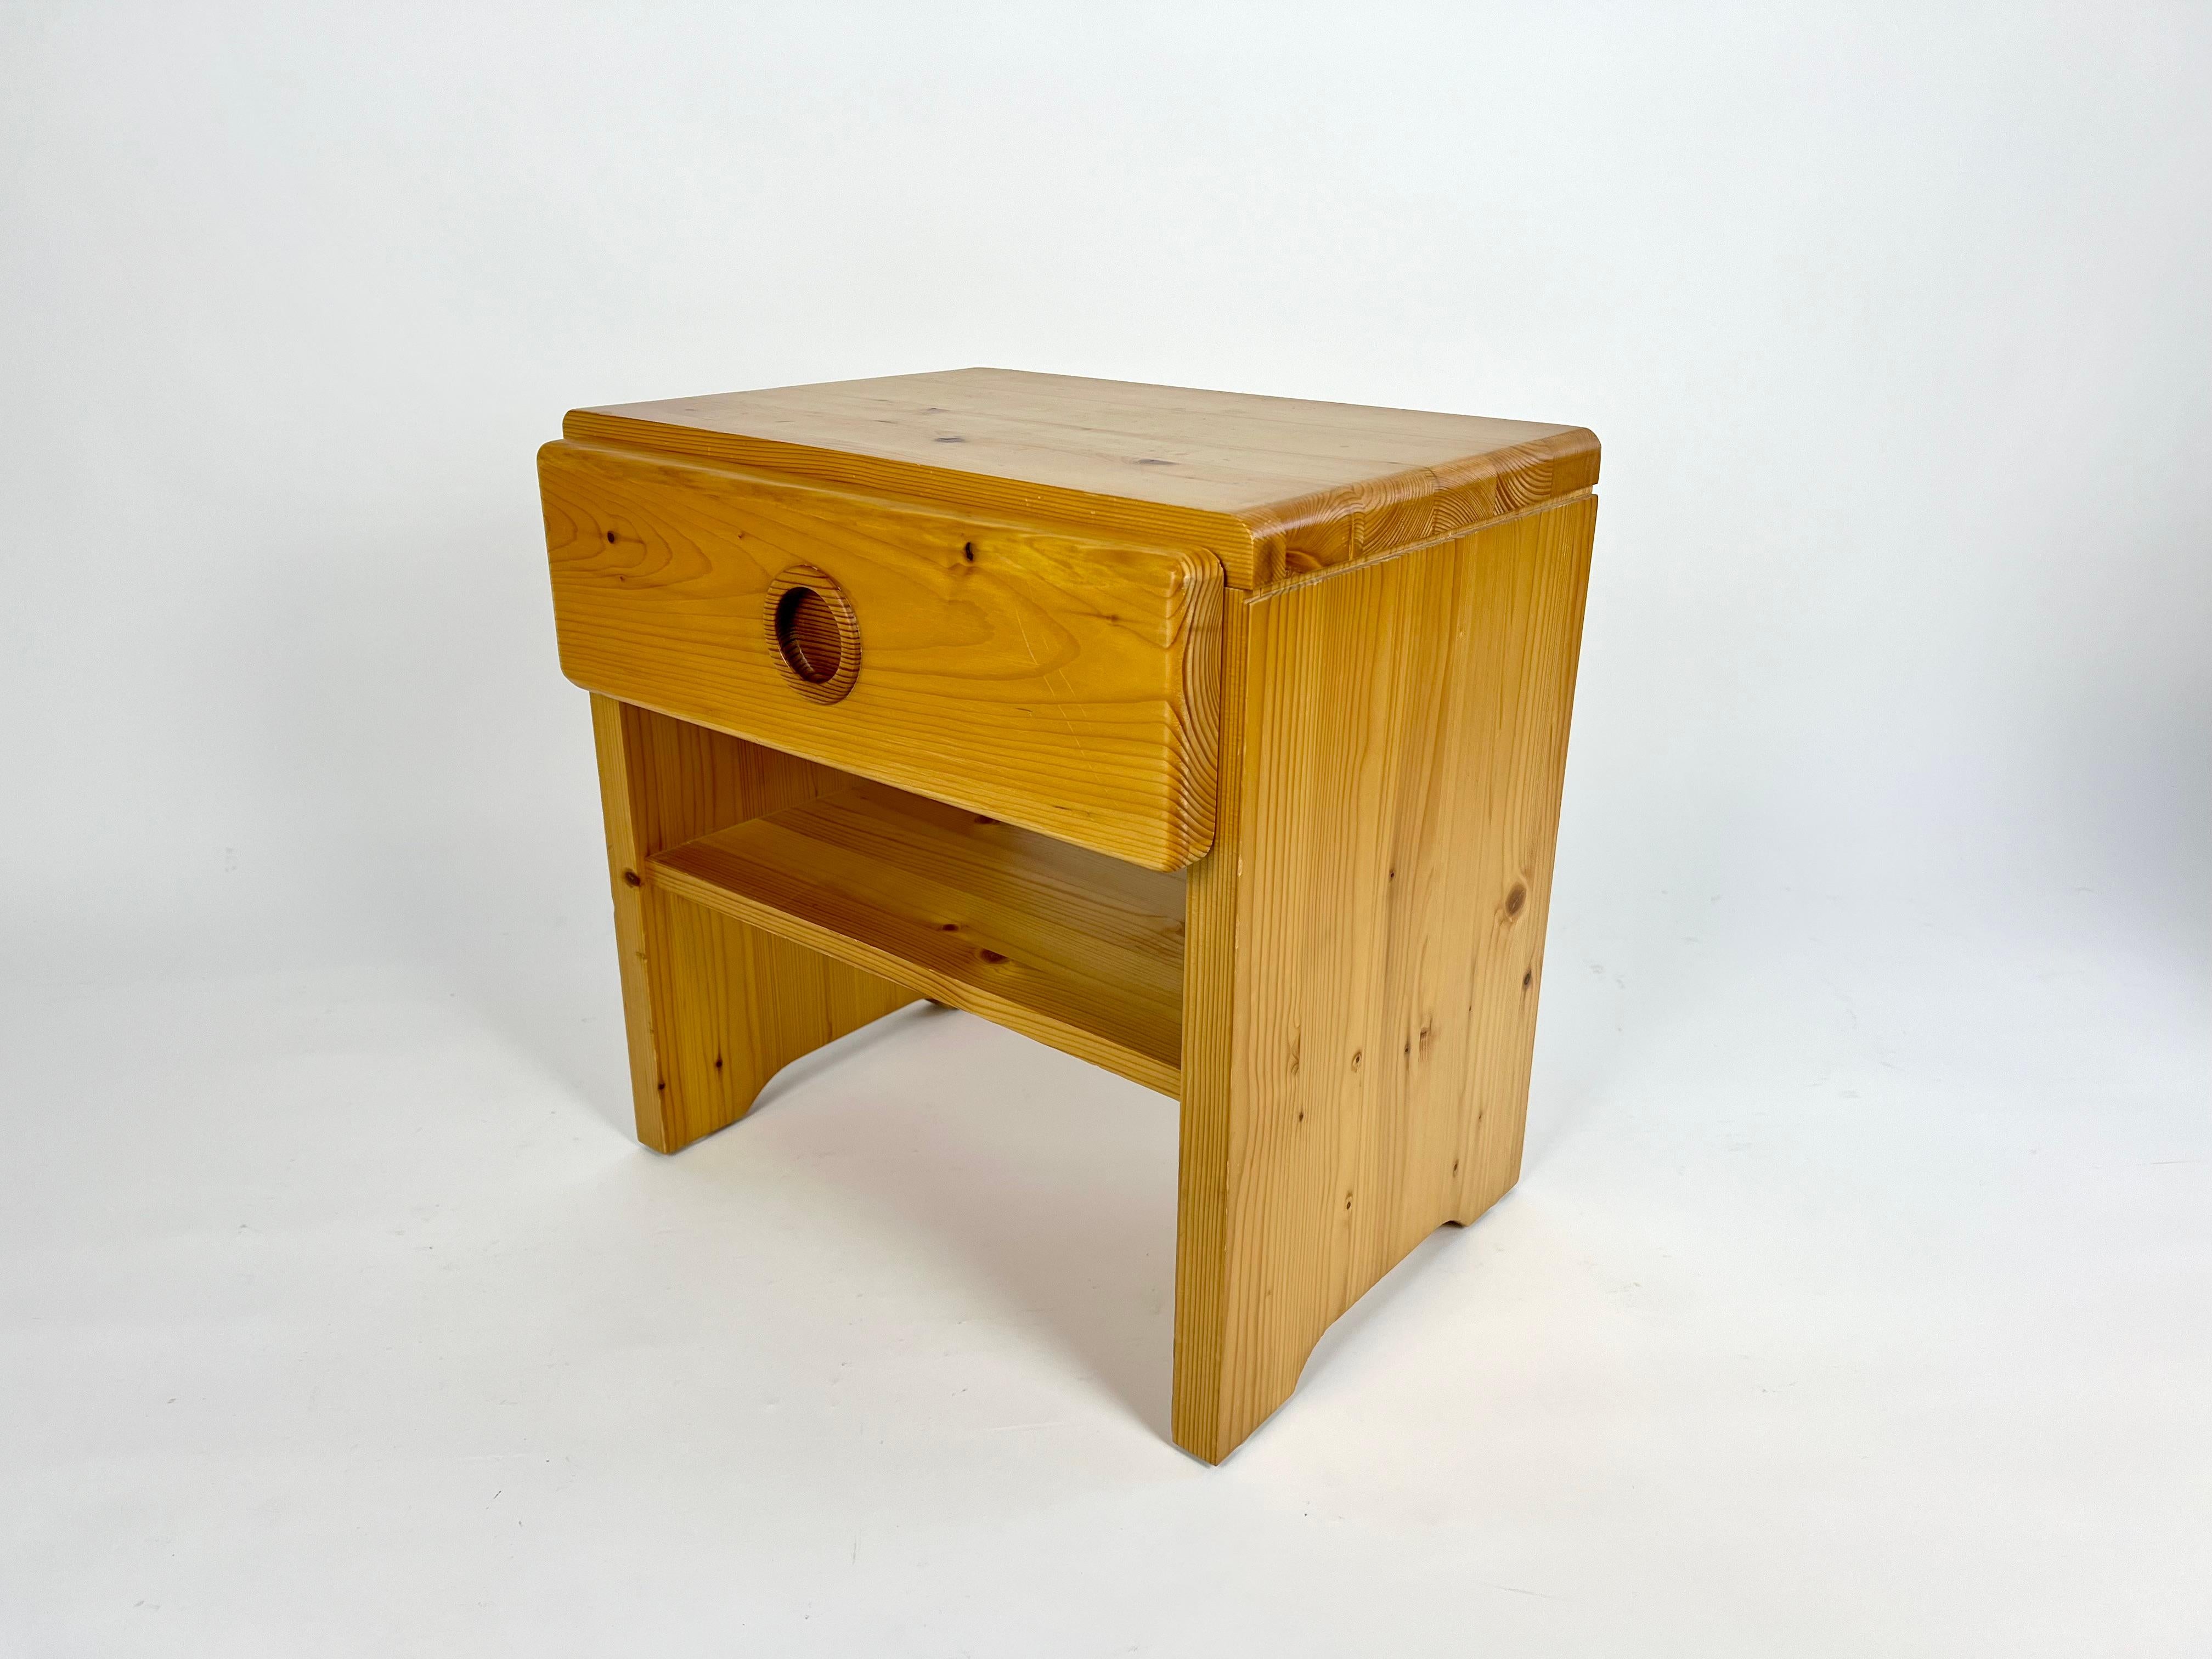 French Vintage pine bedside table from Les Arcs, France. Charlotte Perriand